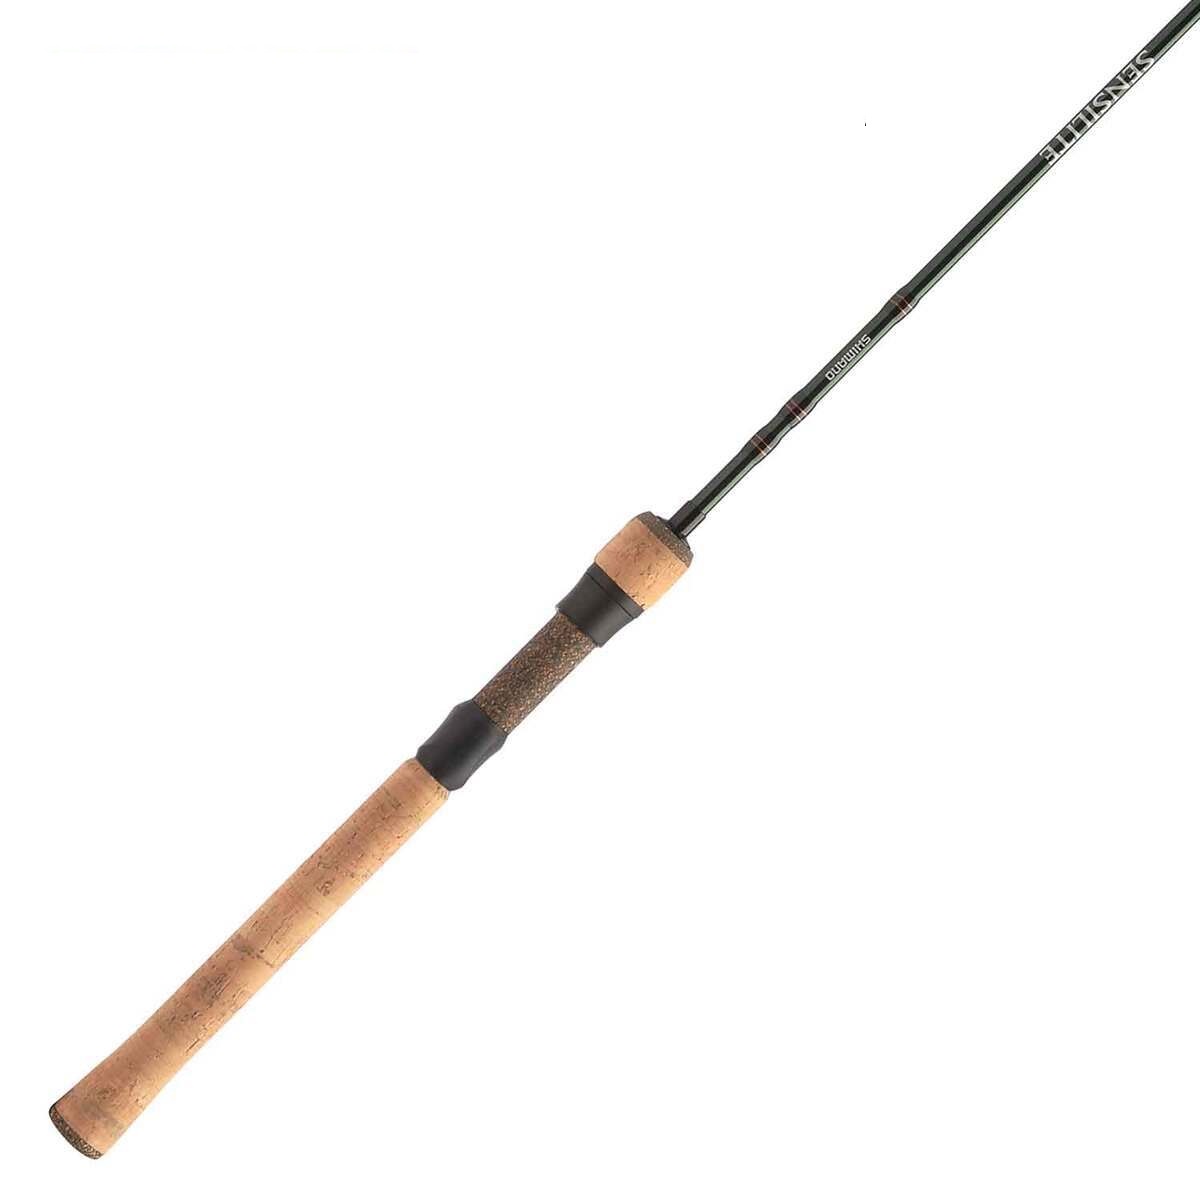 Shimano Sensilite Spinning Rod for Sale in Sacramento, CA - OfferUp